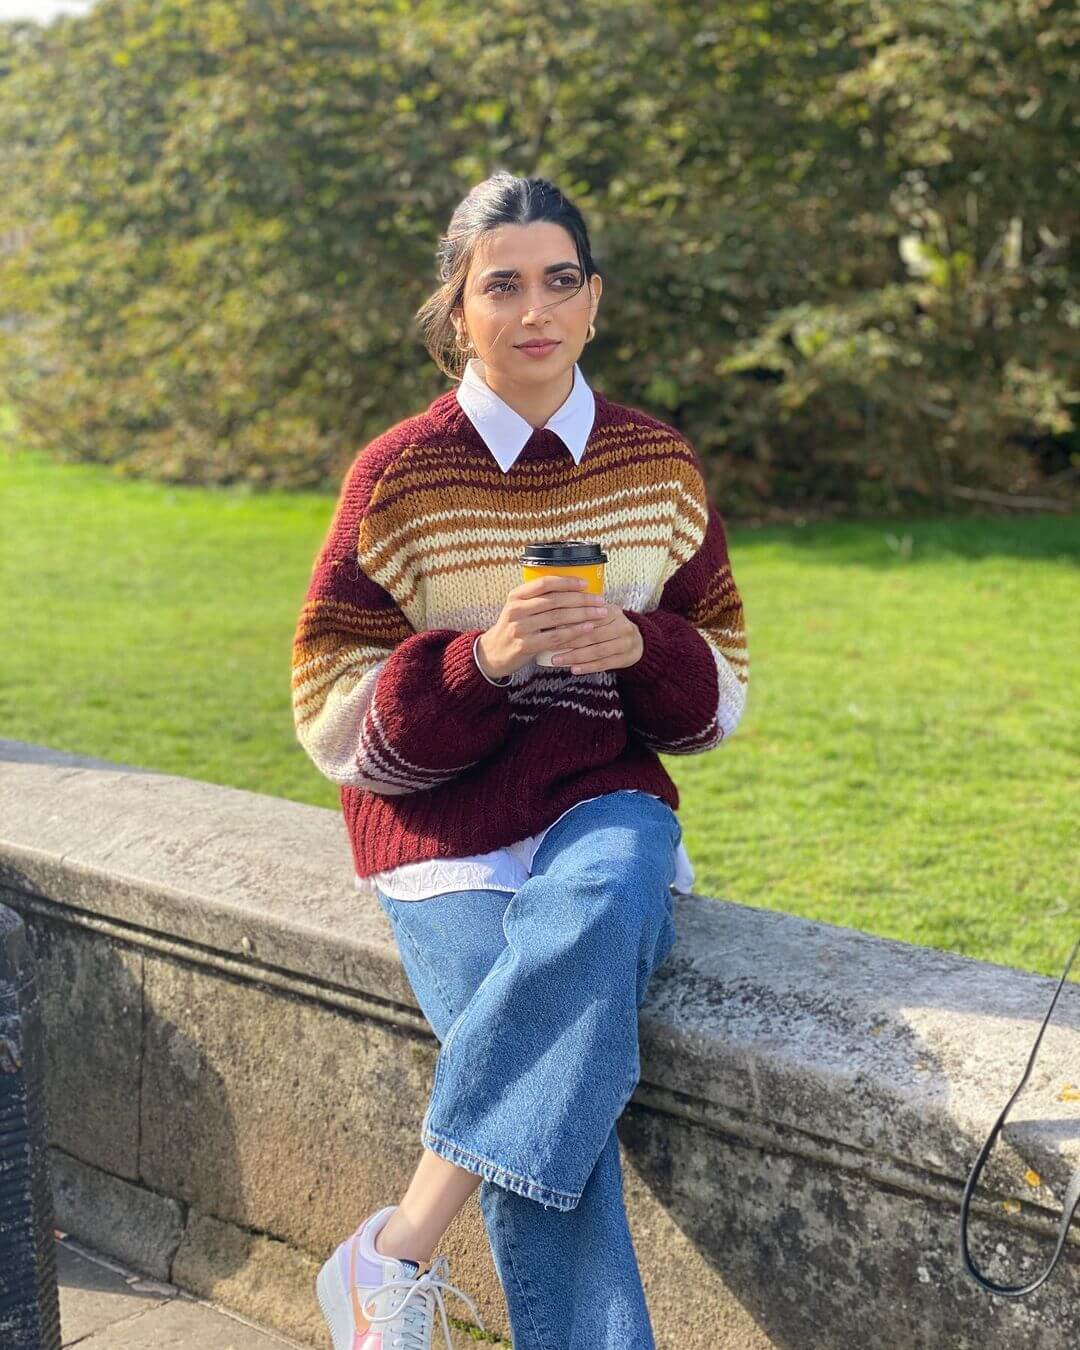 Nimrat Khaira Casual Look In Maroon Baggy Sweater With Denim Jeans Outfit Nimrat Khaira Desi And Classy Outfit